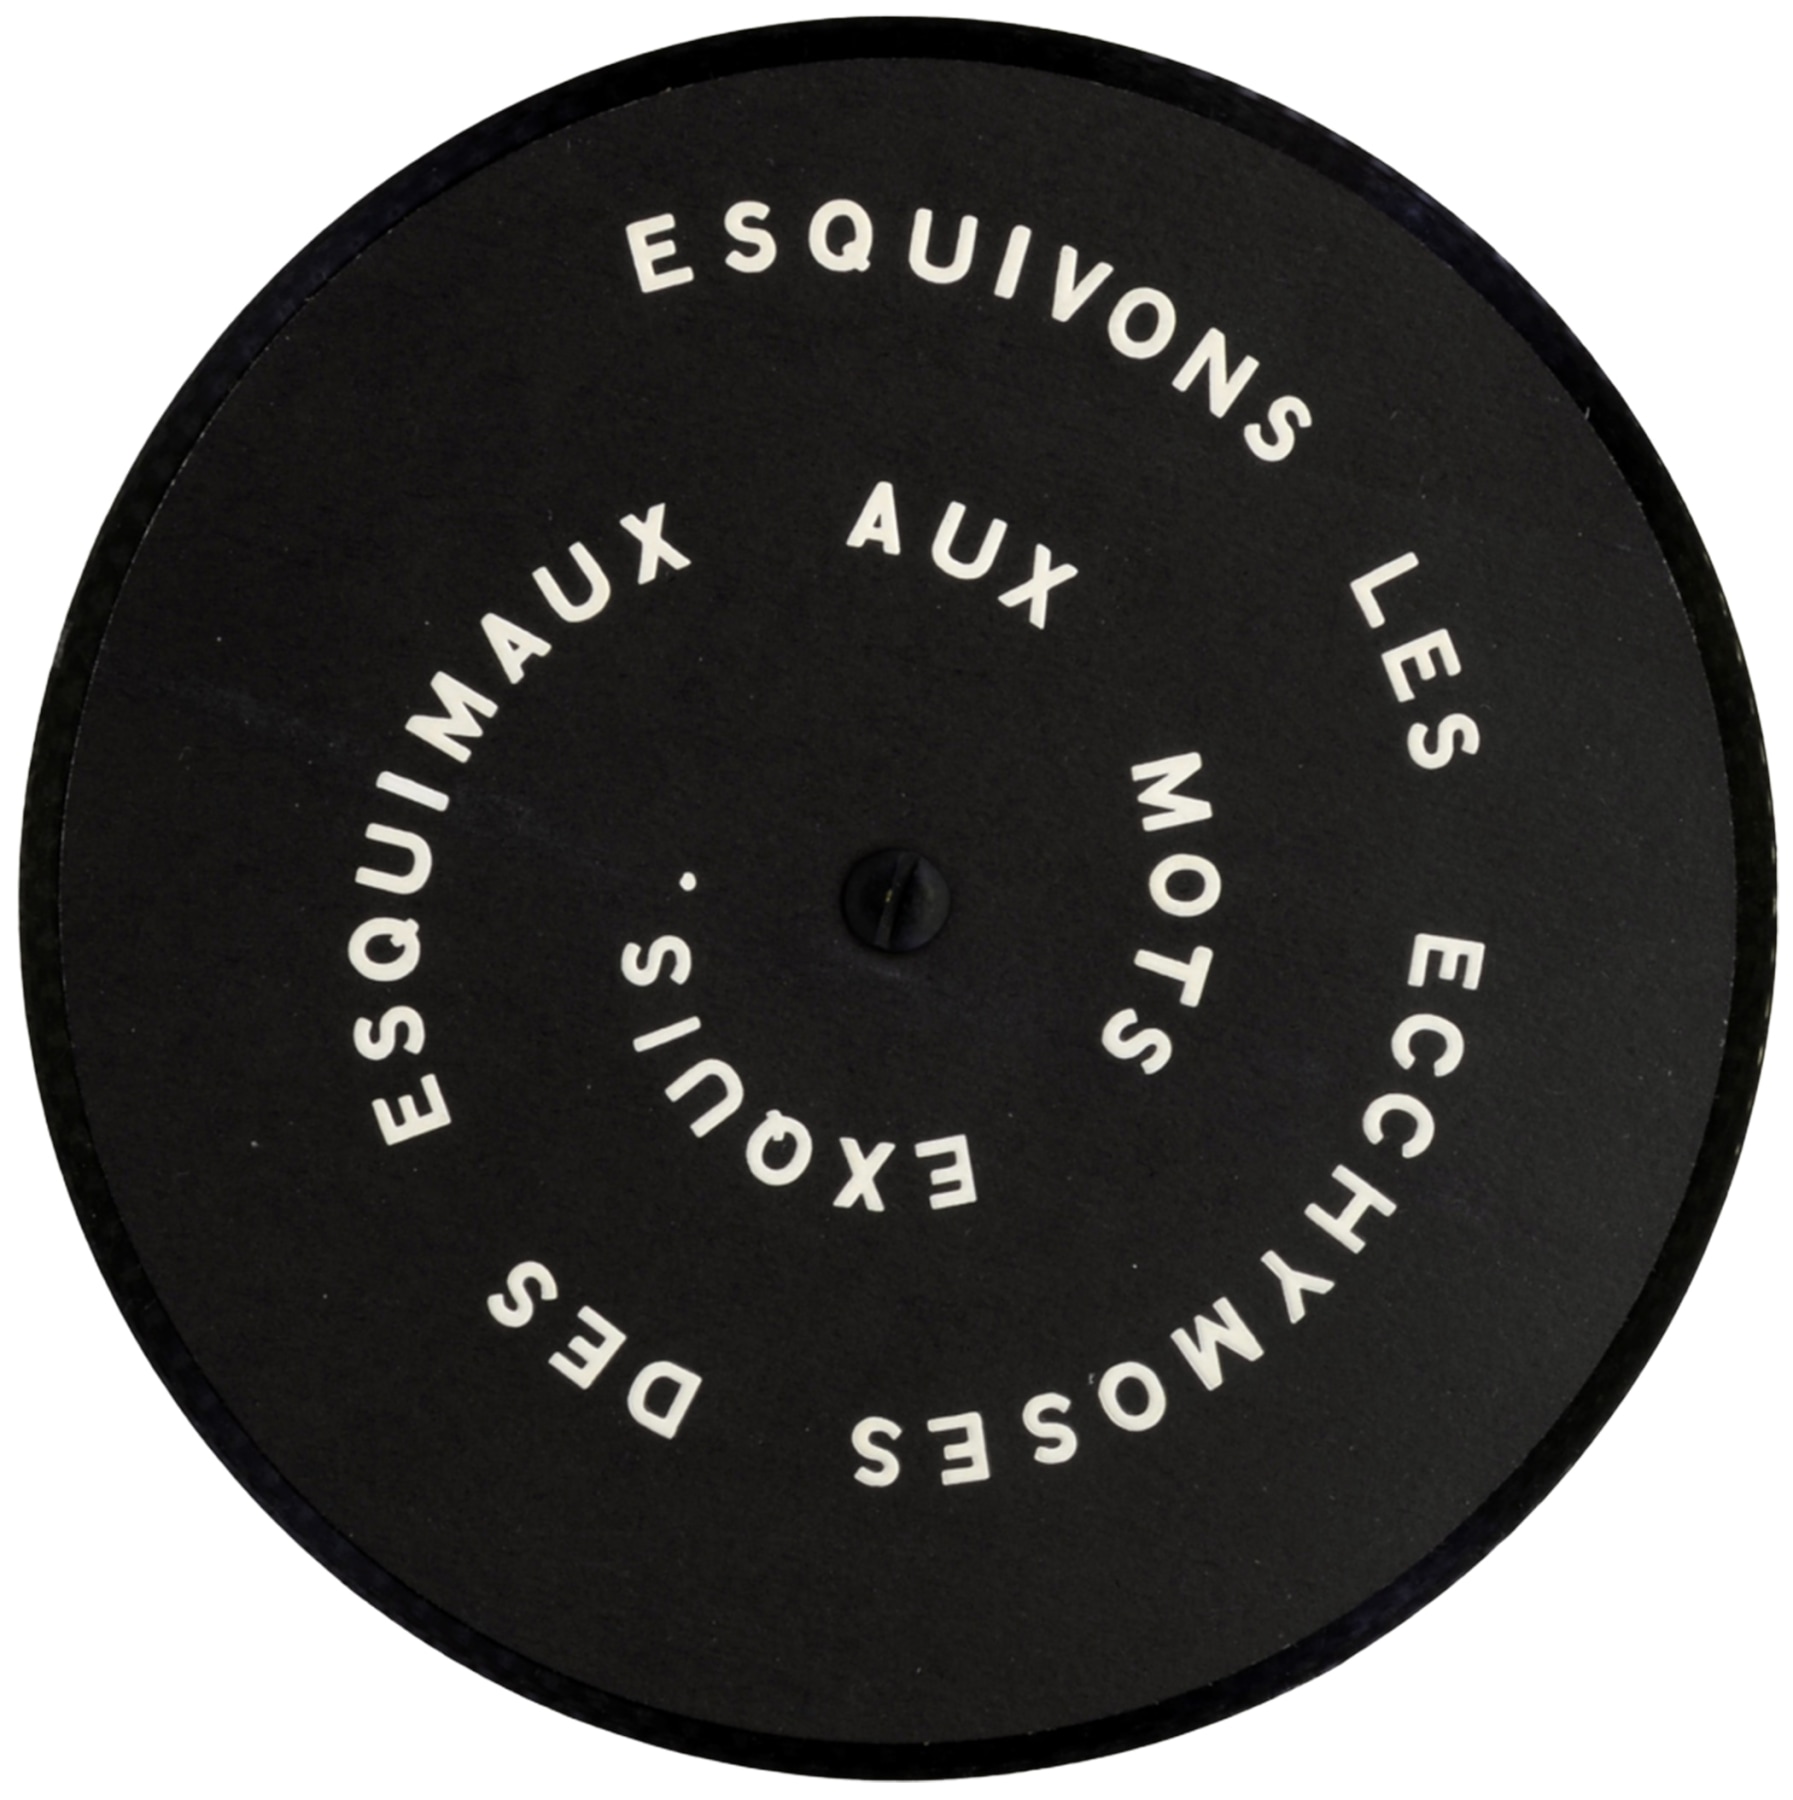 The record that Marcel Duchamp produced with the Letter Edged in Black Press (&quot;Esquivons les ecchymoses des esquimax aux mots exquis:), 1968. Copyright William N. Copley Estate. Courtesy of Alden Projects&trade;